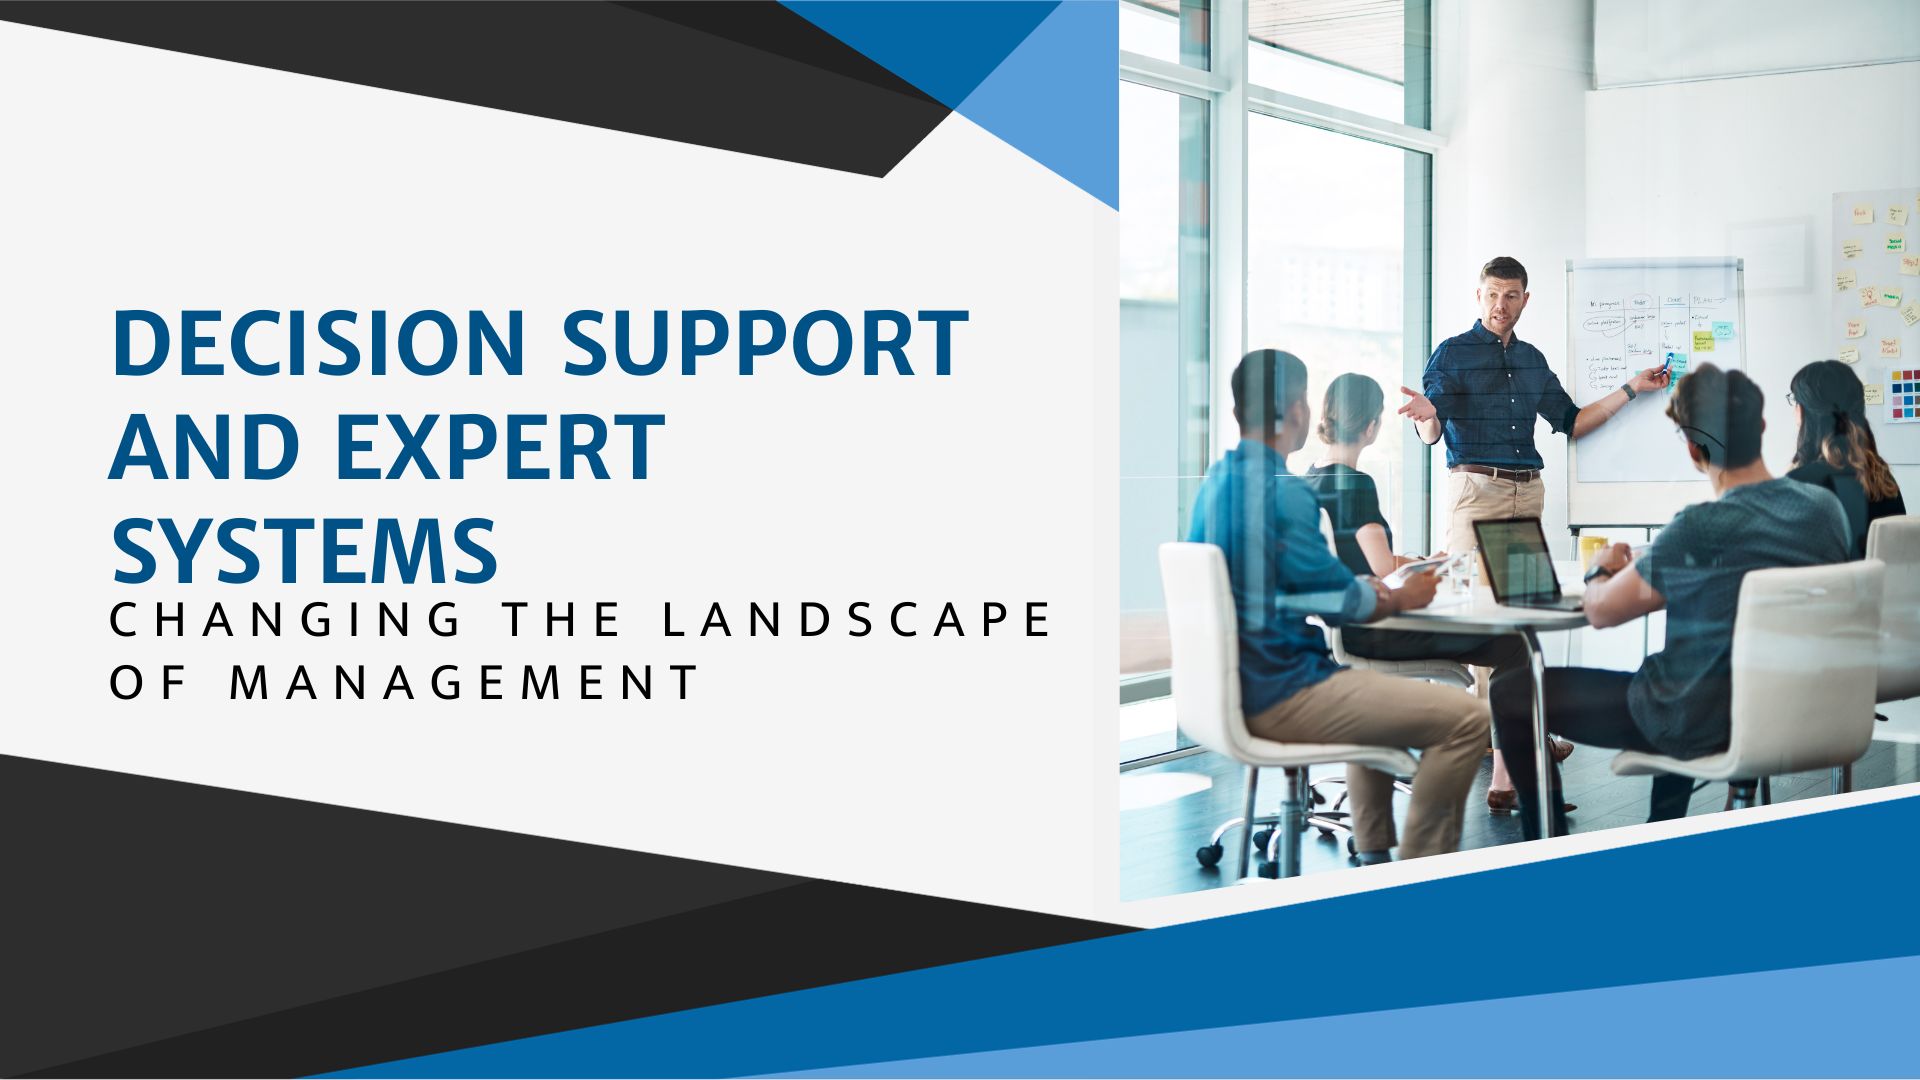 Decision Support and Expert Systems: Changing the Landscape of Management